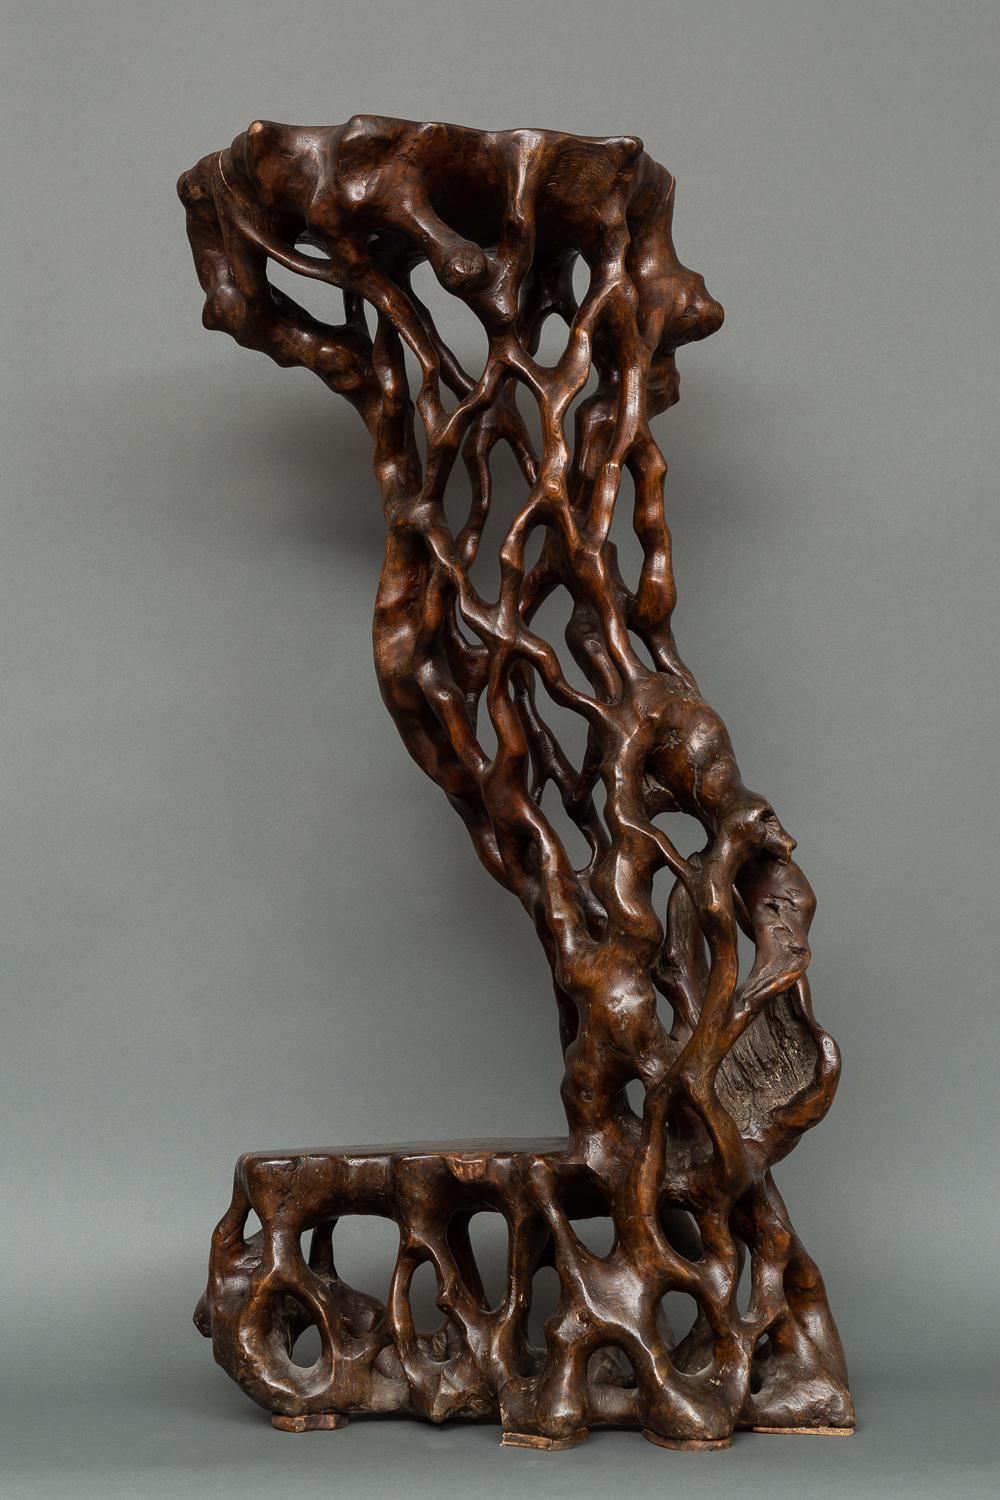 Japanese two-tier root stand. Traditionally used for displaying flower arrangements.